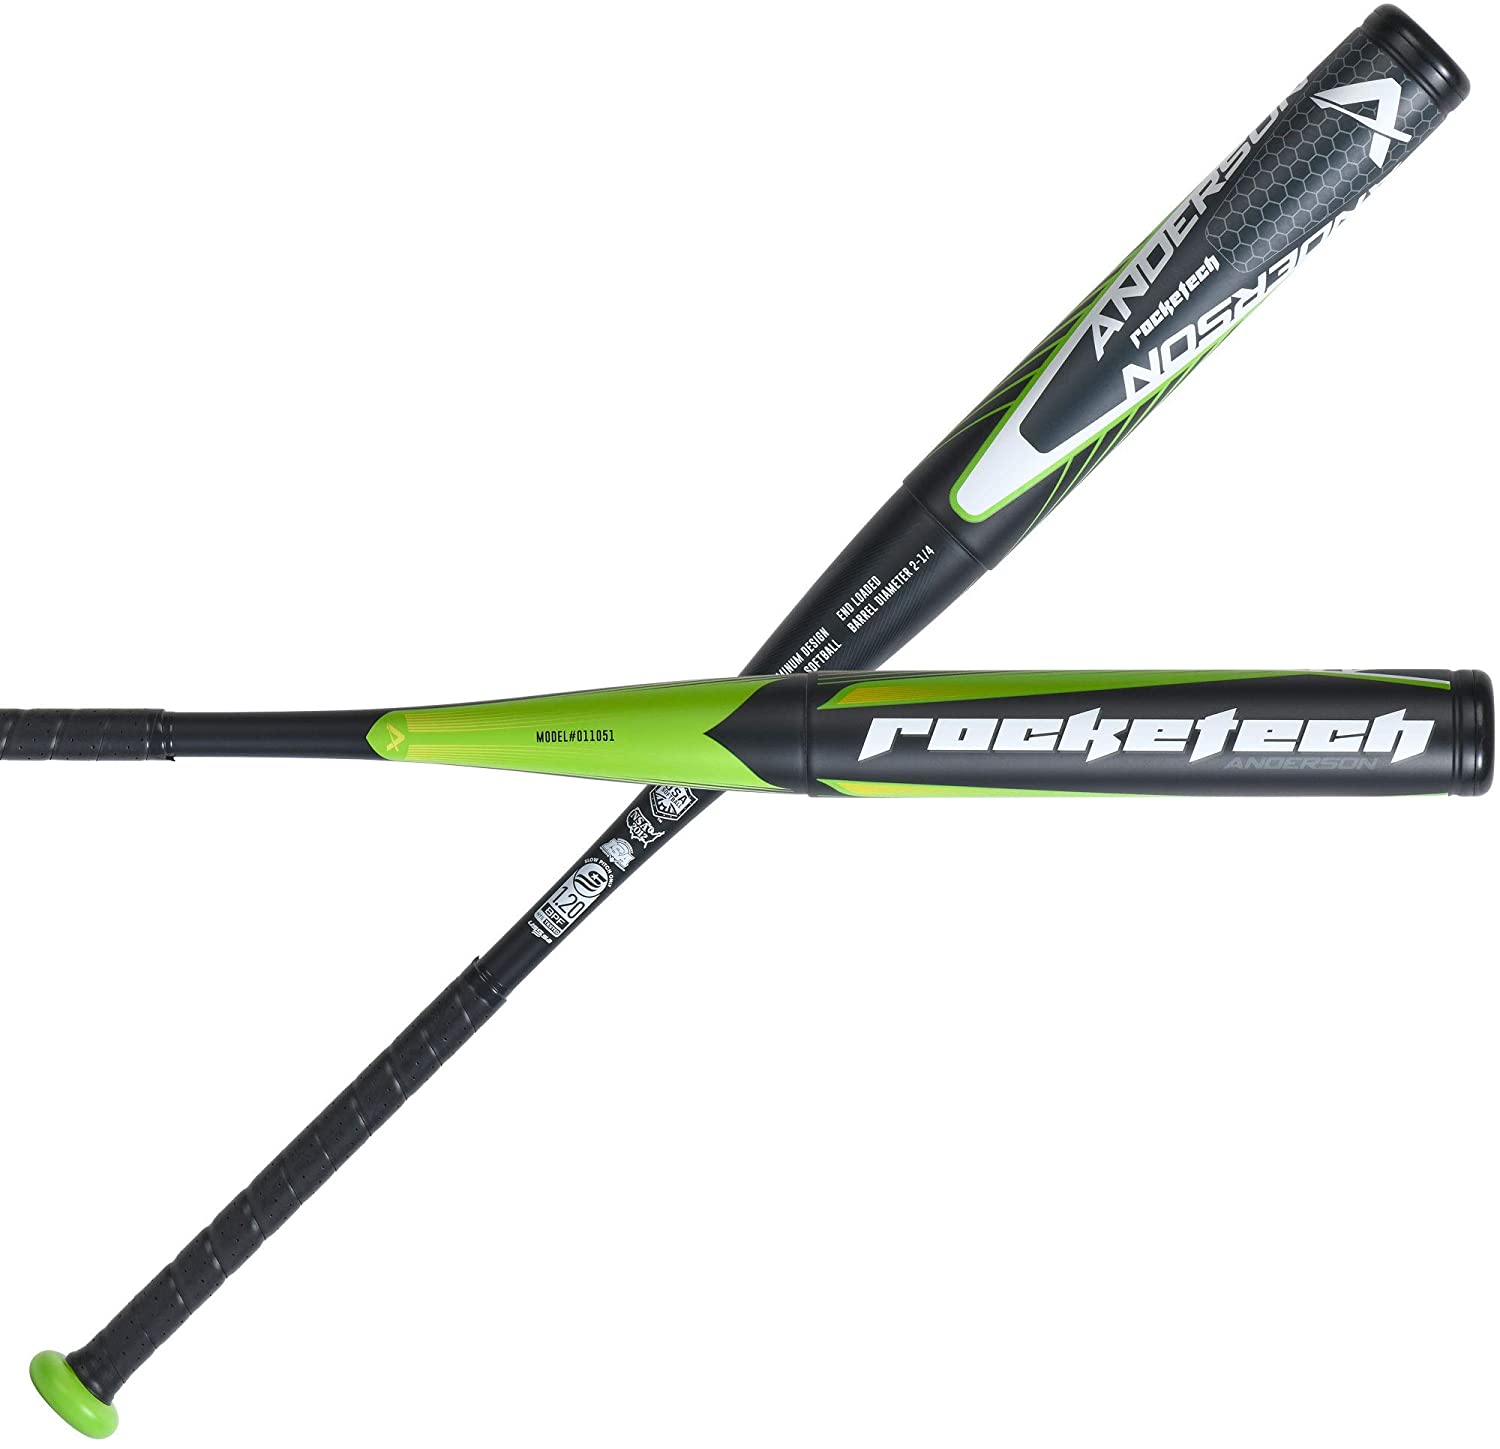 anderson-rocketech-2021-slowpitch-softball-bat-34-inch-30-oz 0110513-3430 Anderson  For over 15 years the Anderson Rocketech has been dominating the